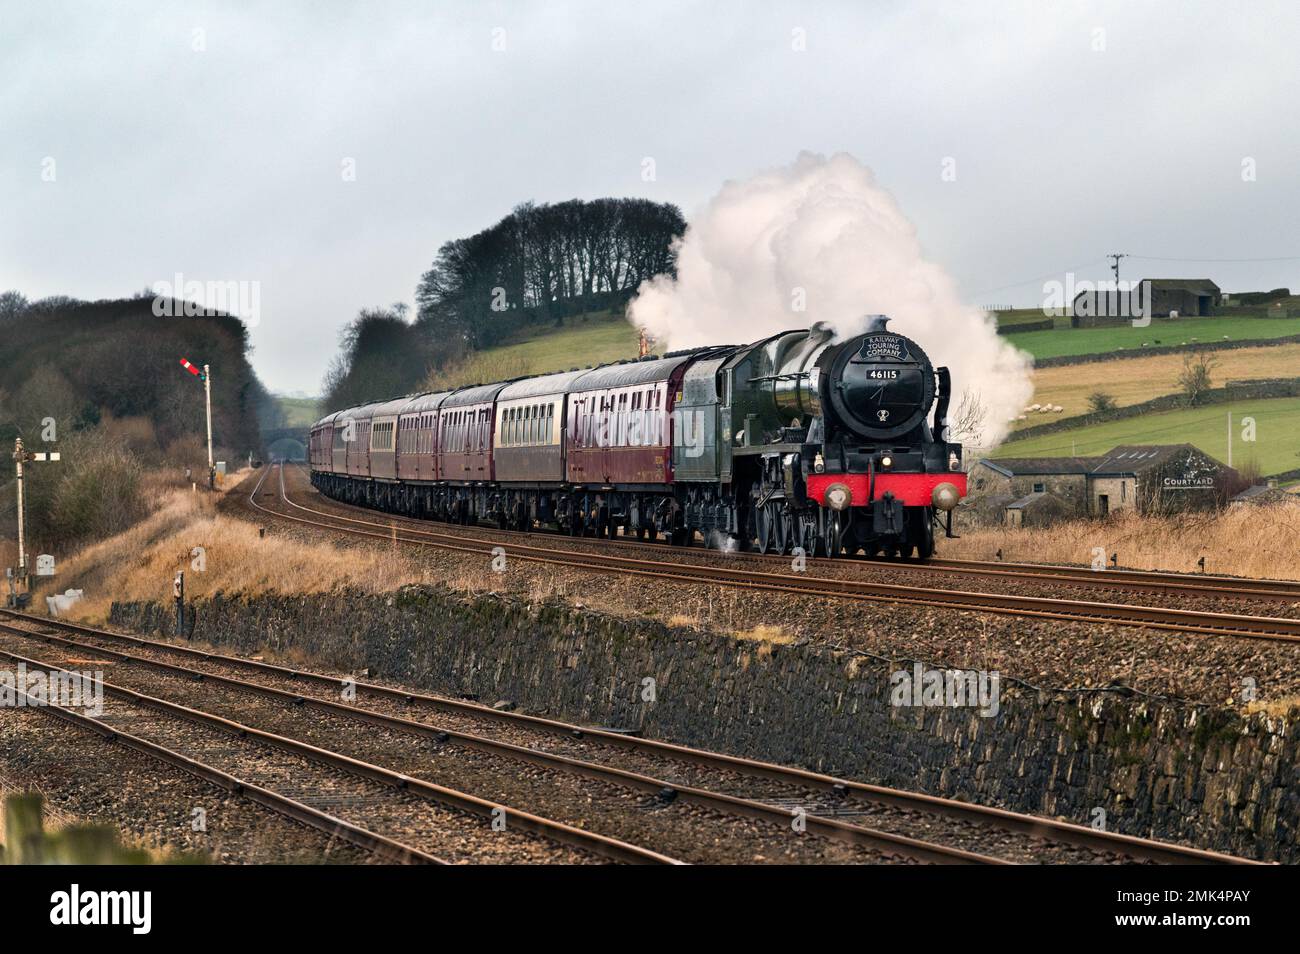 Steam special on the famous Settle-Carlisle railway line. 'The Winter Cumbrian Mountain Express' hauled by steam locomotive 'Scots Guardsman', 46115.  The train is seen here at Settle Junction at the southern end of the Settle-Carlisle railway line. Credit: John Bentley/Alamy Live News Stock Photo